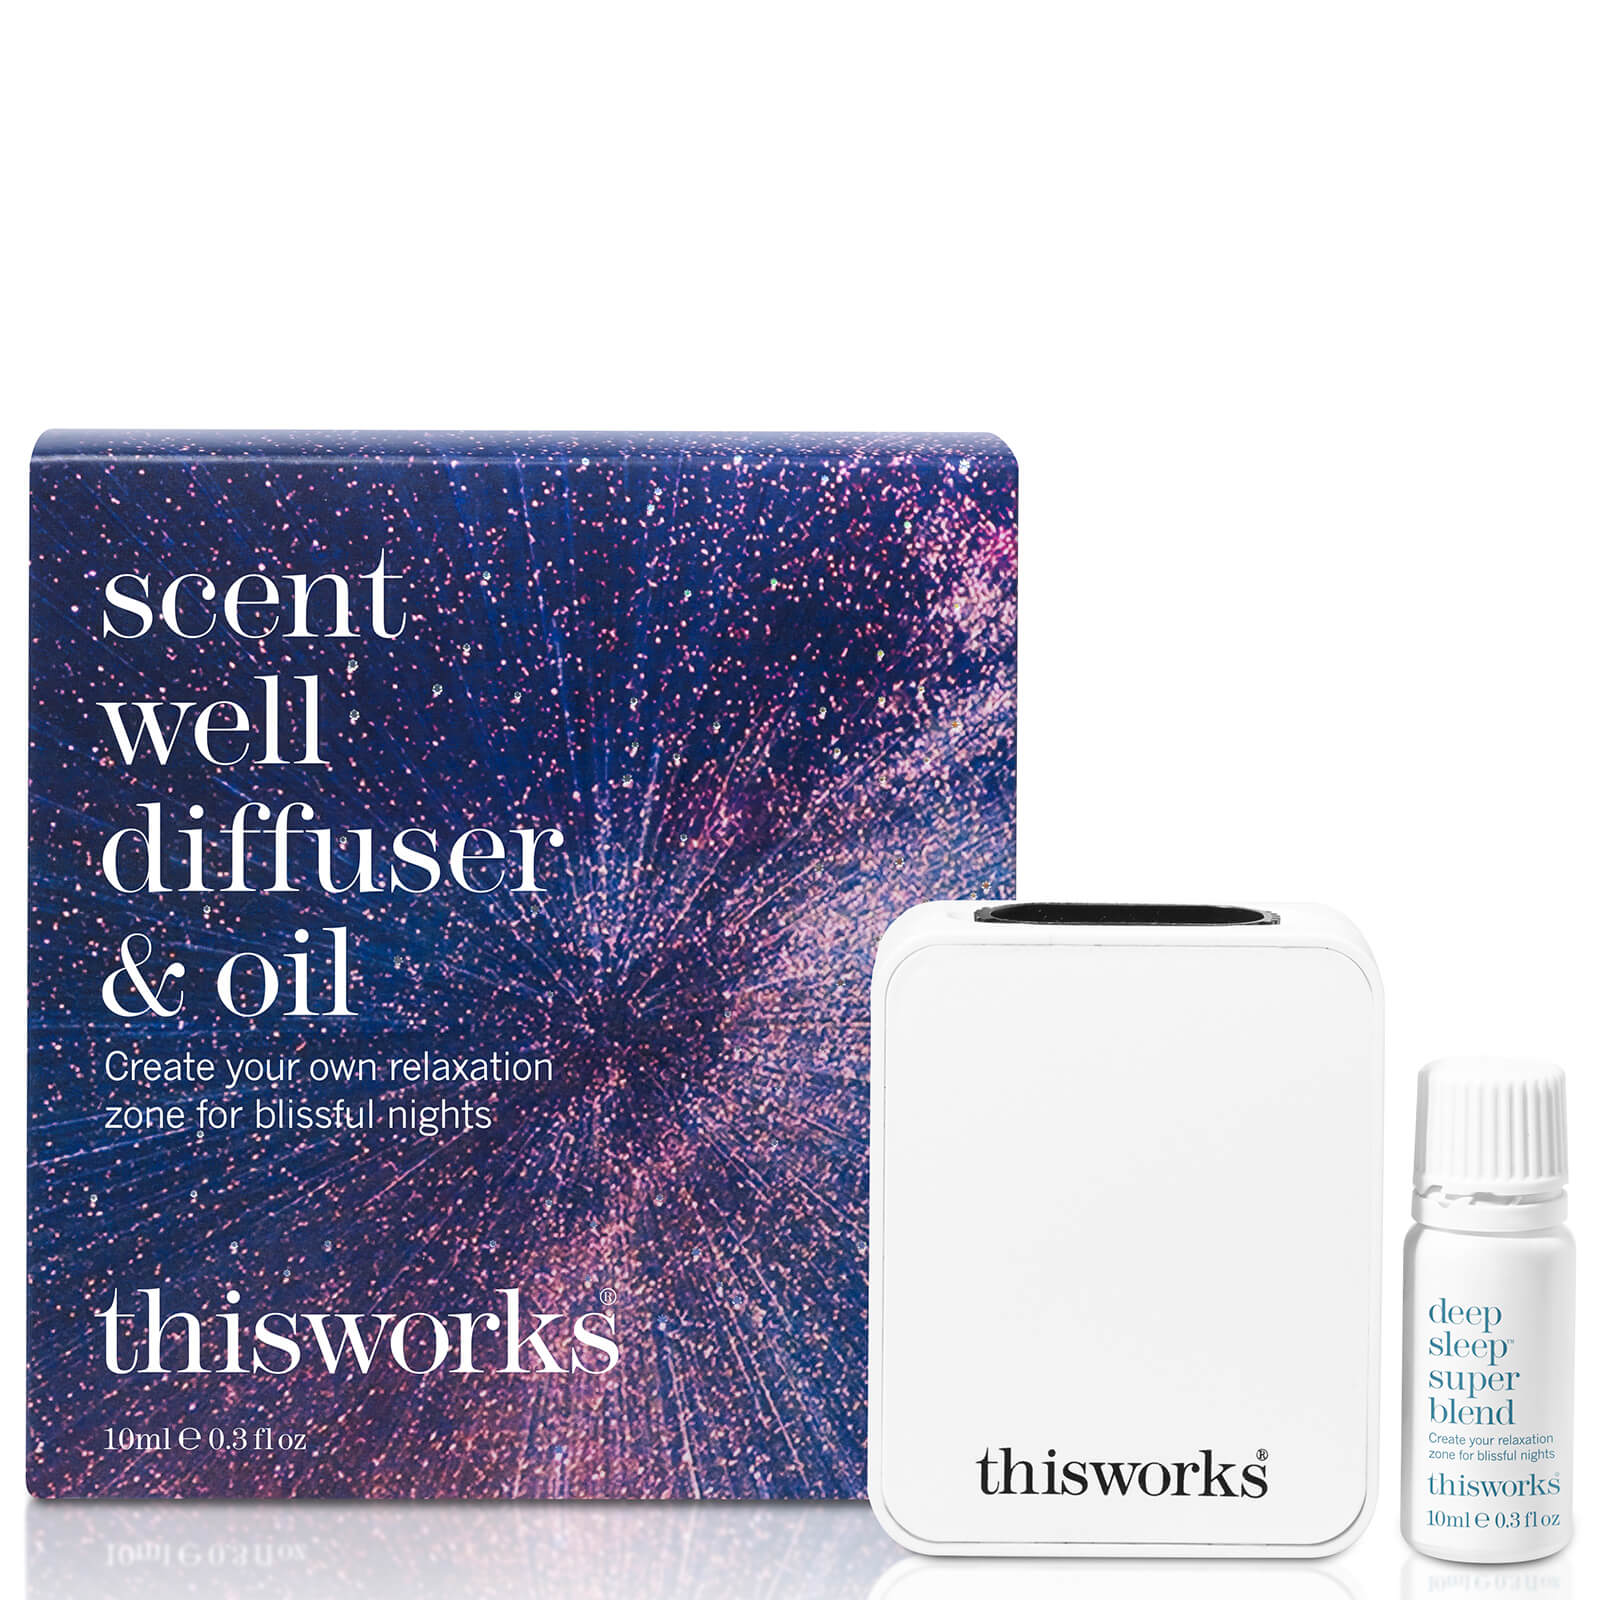 Aceite y difusor Scent Well Diffuser de this works 10 ml